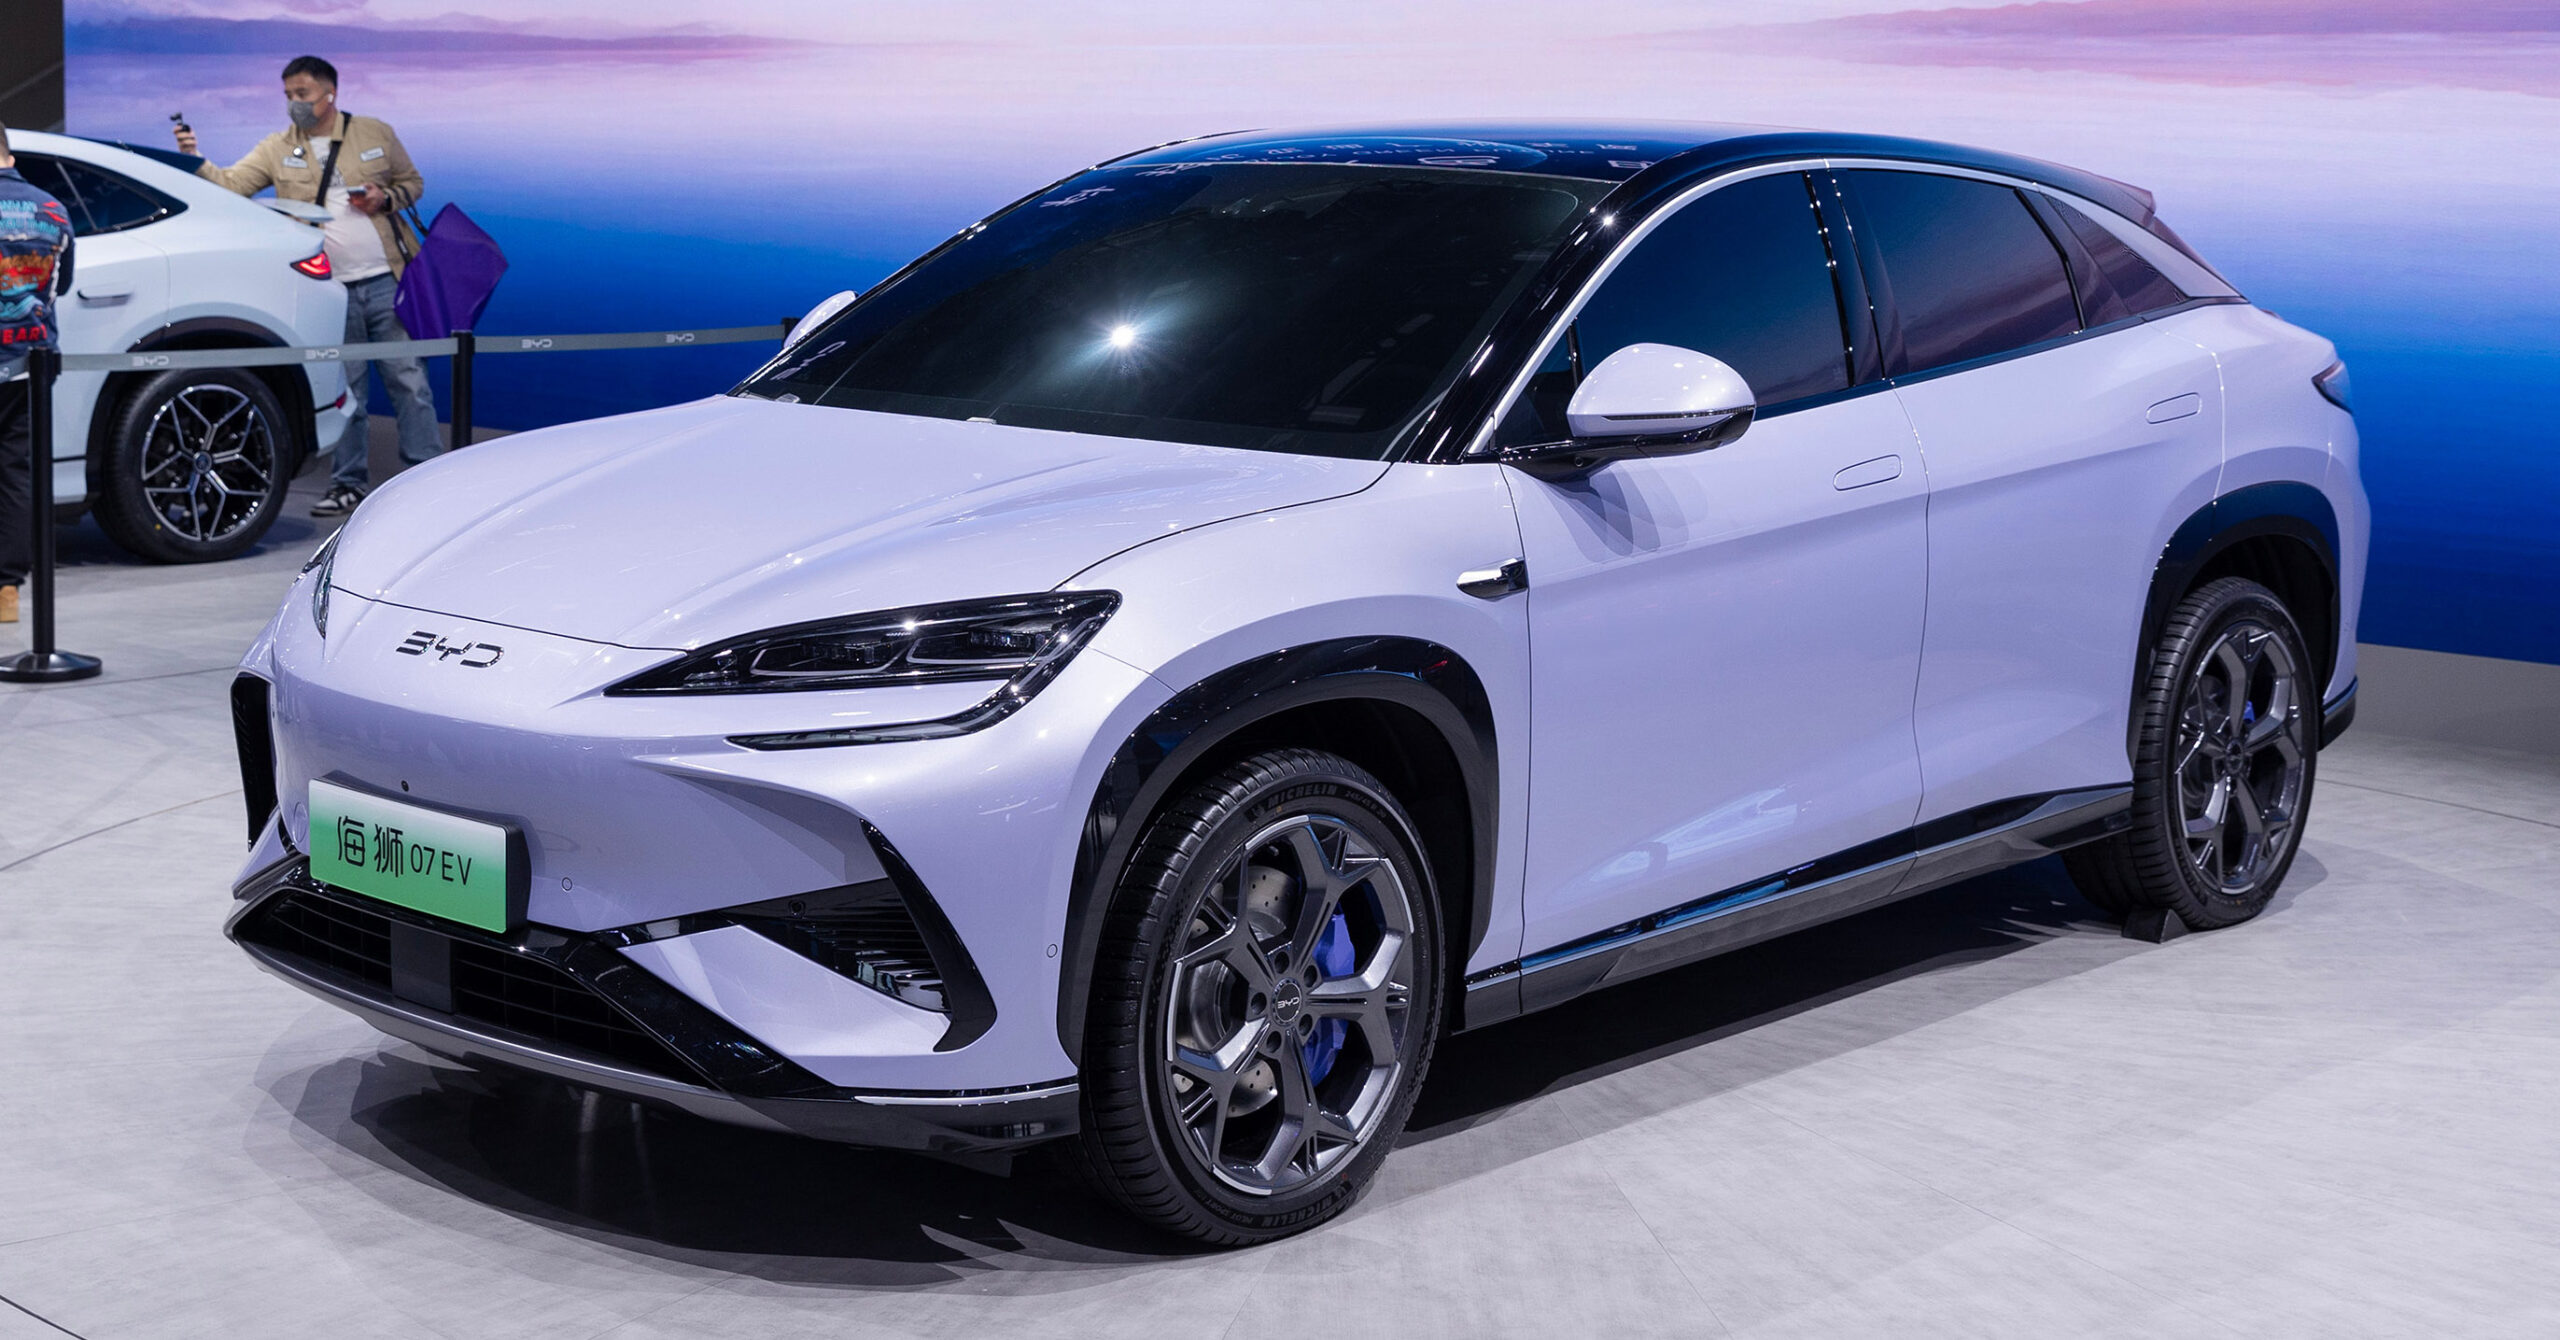 The BYD Sea Lion 07 electric crossover has been unveiled